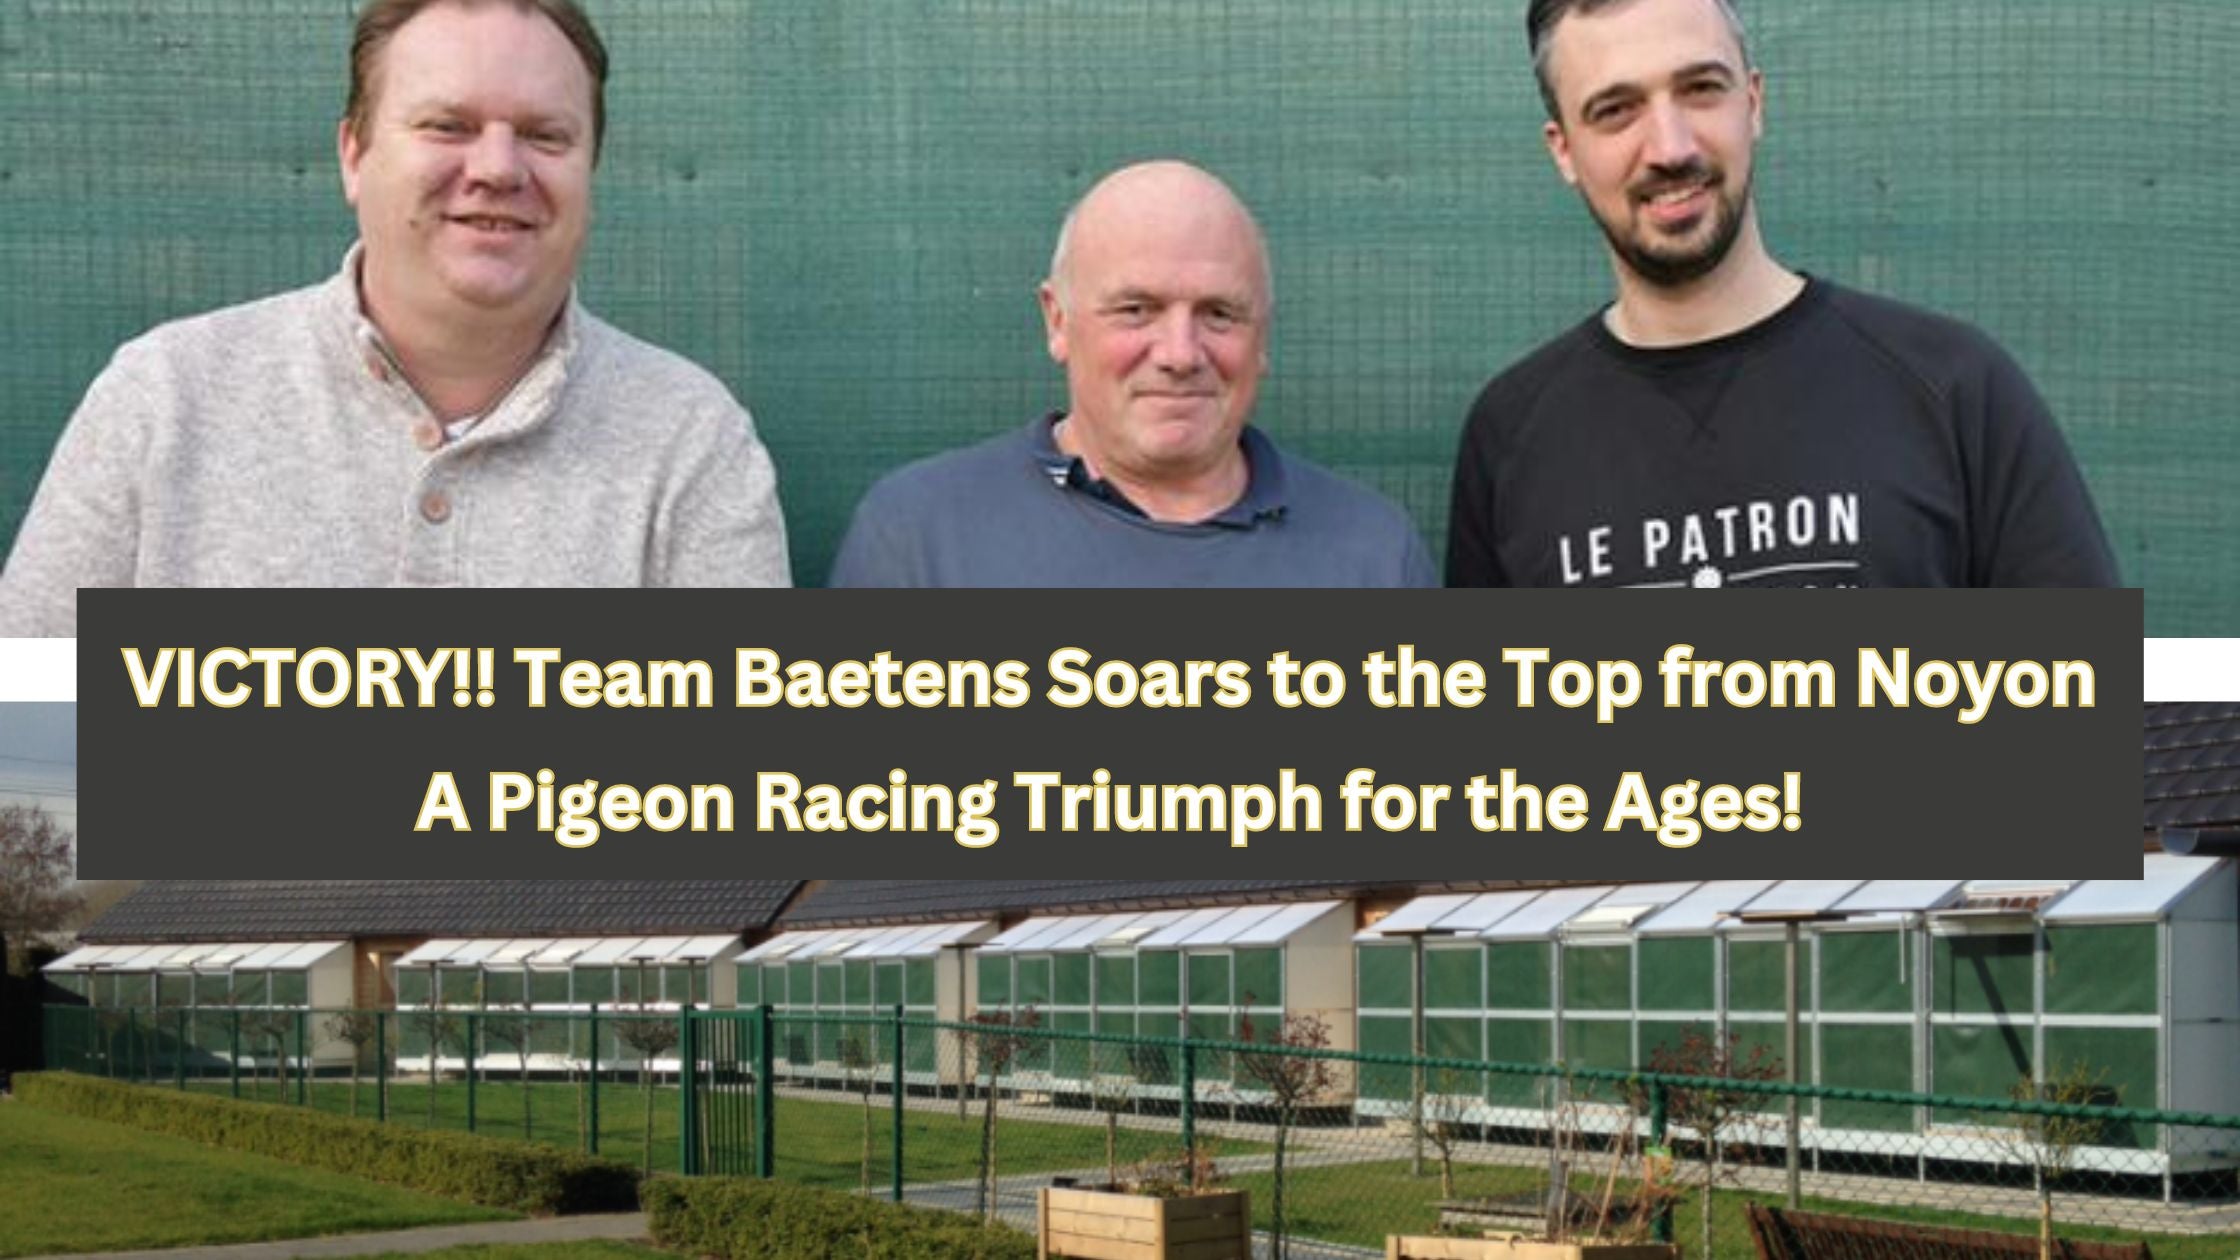 VICTORY!! Team Baetens Soars to the Top from Noyon – A Pigeon Racing Triumph for the Ages!